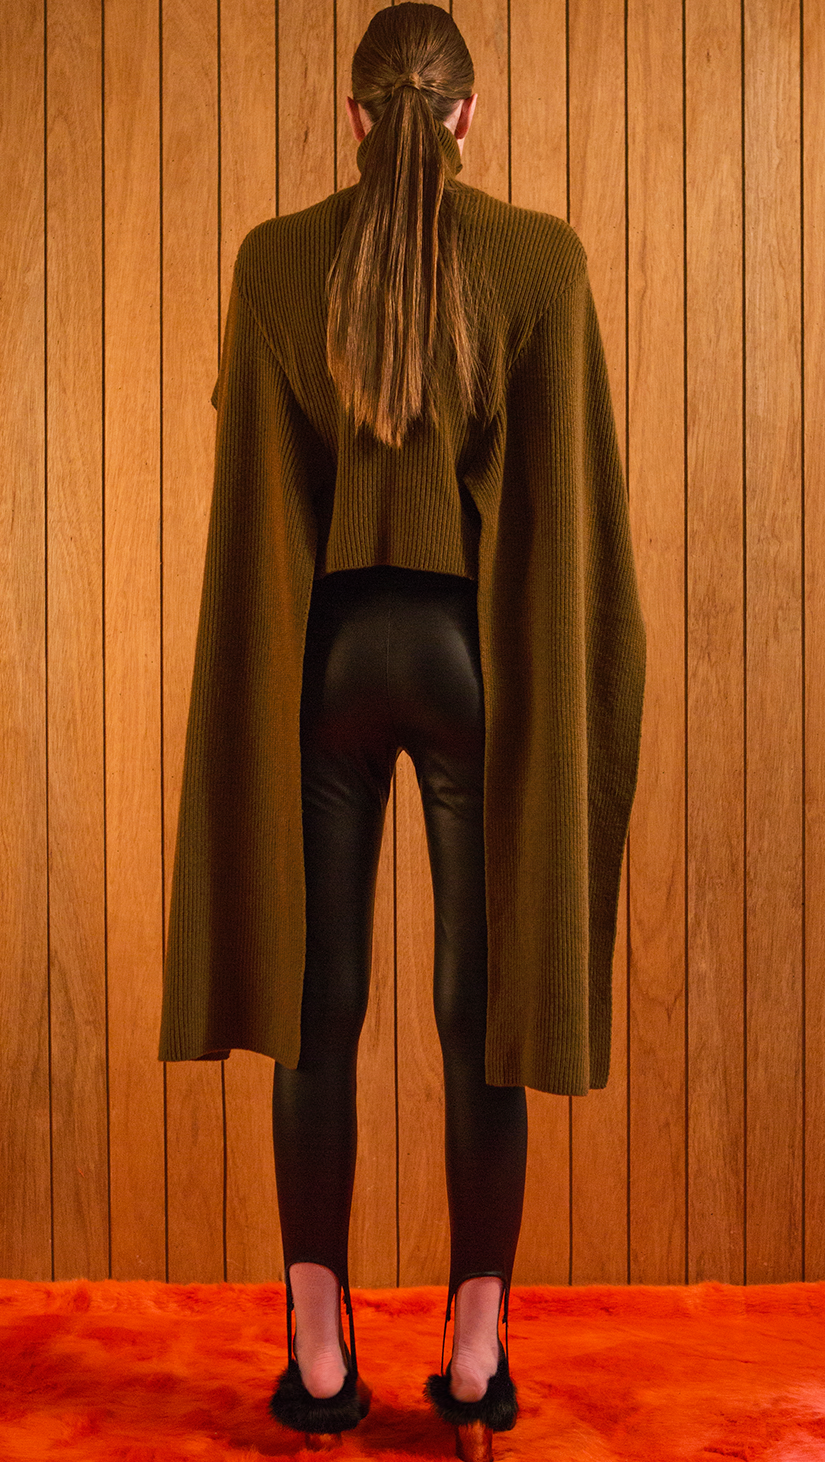 The Keri in stretchy leather legging pant. With a strap at ankle, elasticated banding at waist. Slim fit. Fleece-lined.